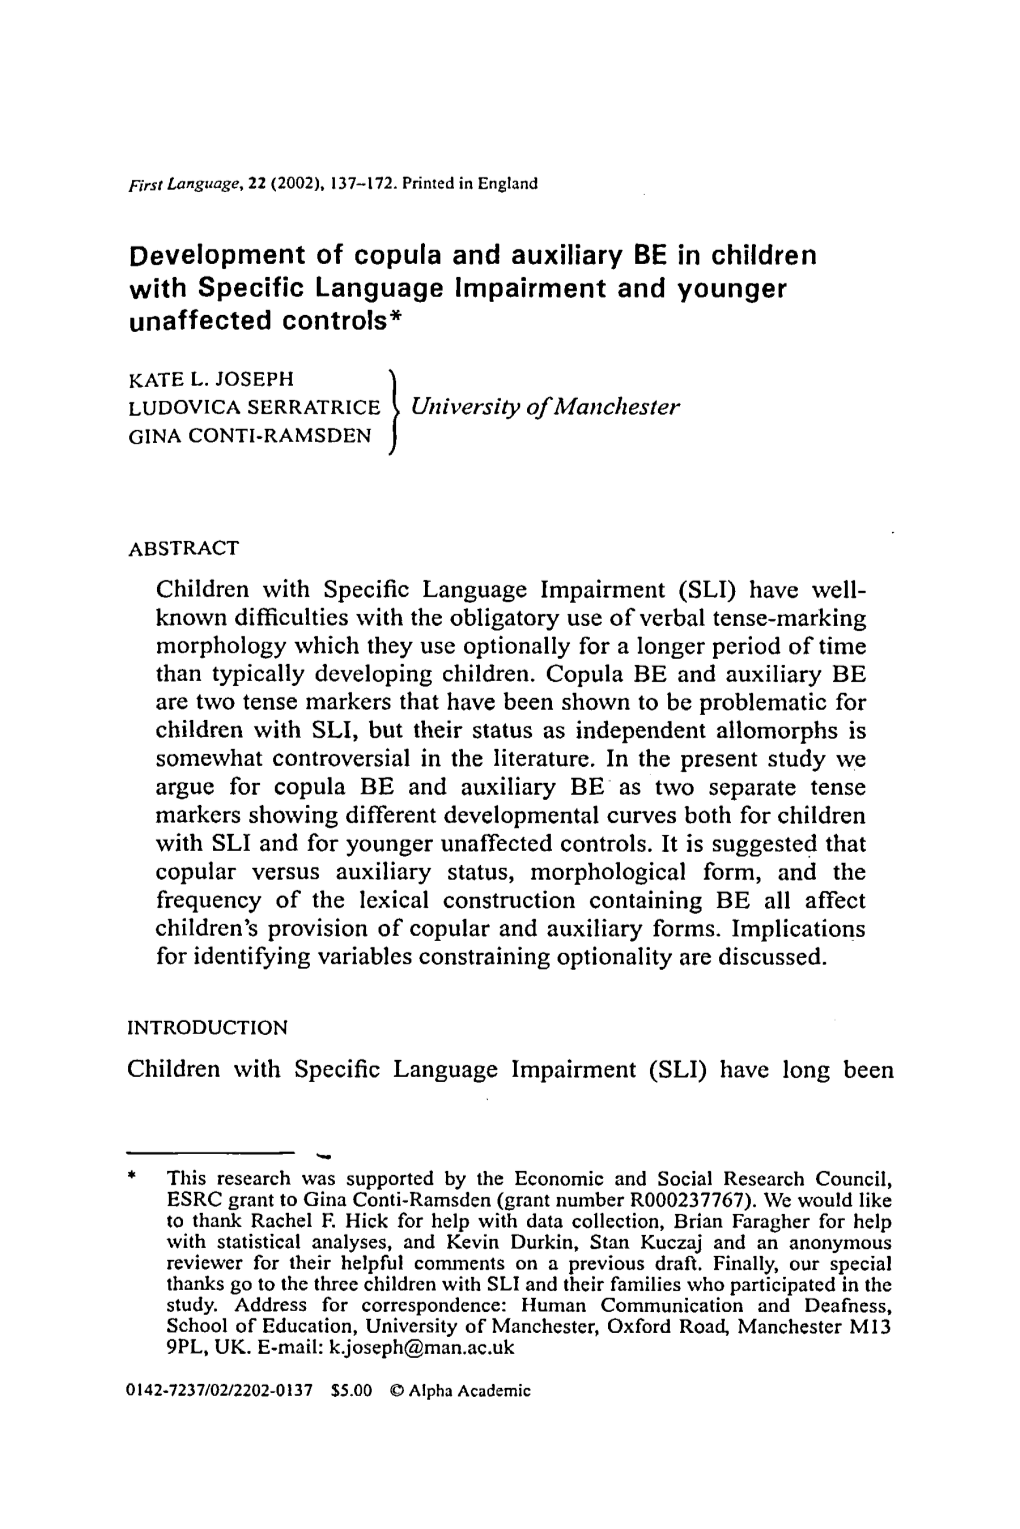 Development of Copula and Auxiliary BE in Children with Specific Language Impairment and Younger Unaffected Controls*